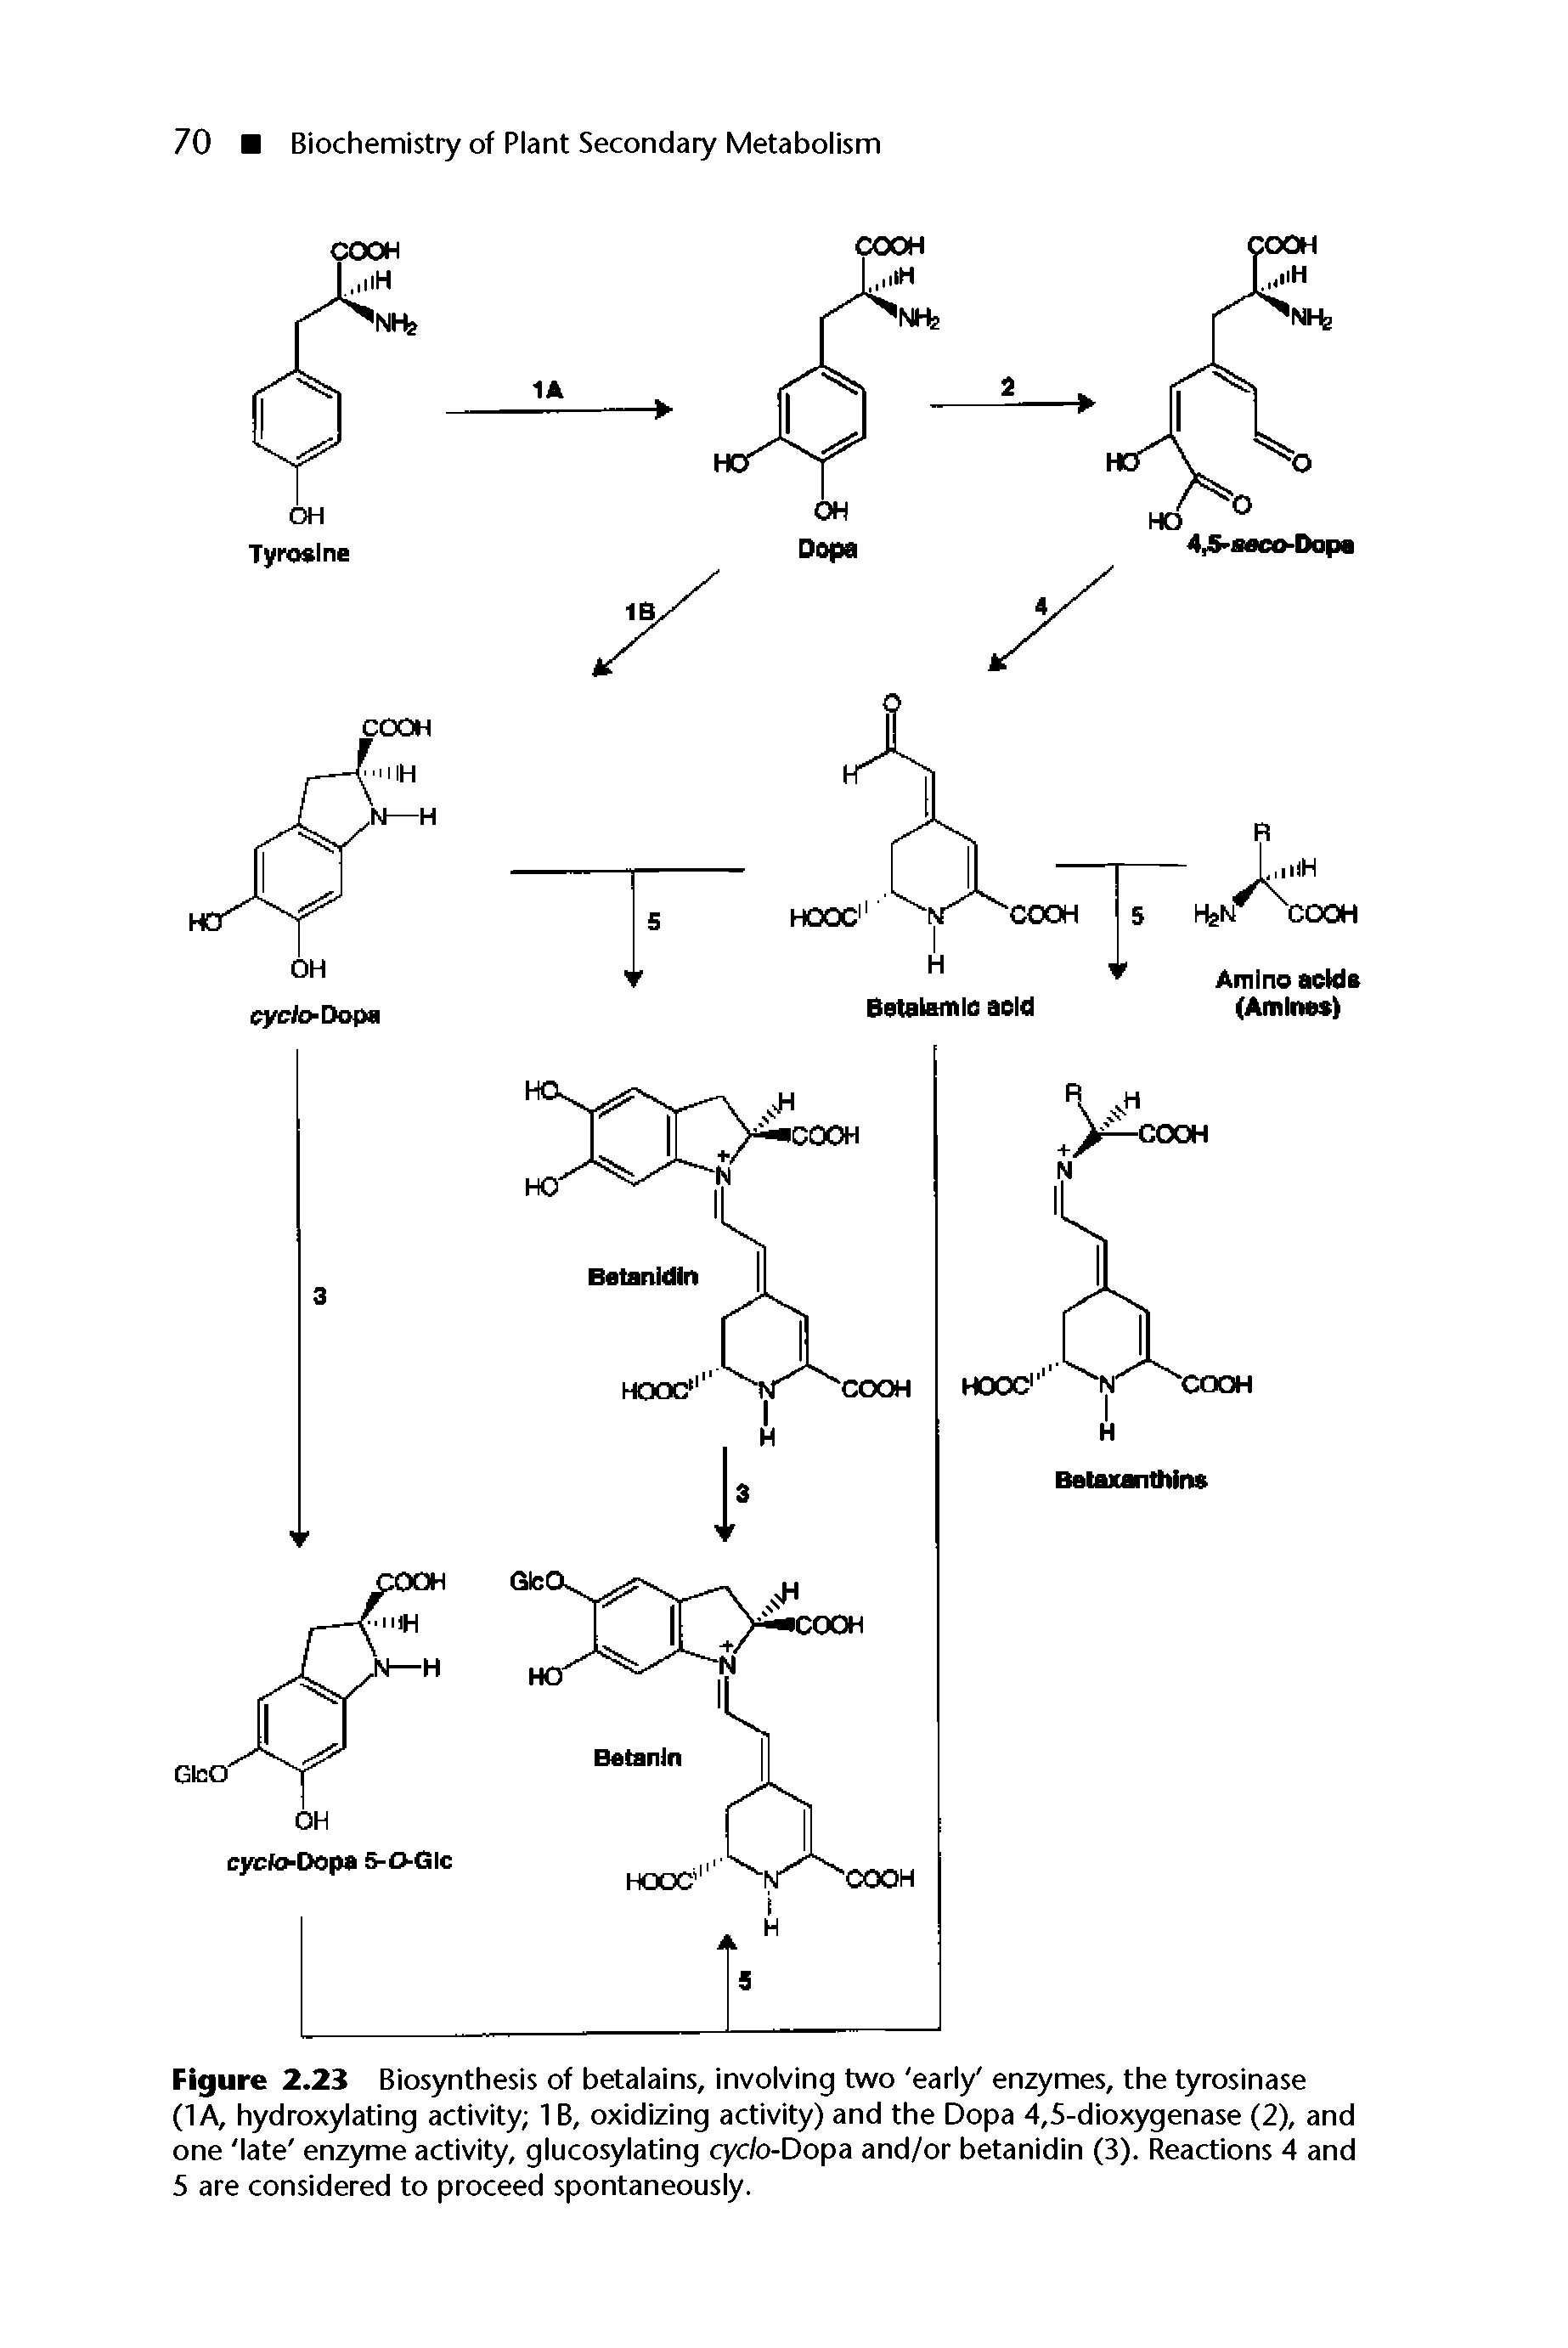 Figure 2.23 Biosynthesis of betalains, involving two early enzymes, the tyrosinase (1A, hydroxylating activity 1 B, oxidizing activity) and the Dopa 4,5-dioxygenase (2), and one late enzyme activity, glucosylating cyc/o-Dopa and/or betanidin (3). Reactions 4 and 5 are considered to proceed spontaneously.